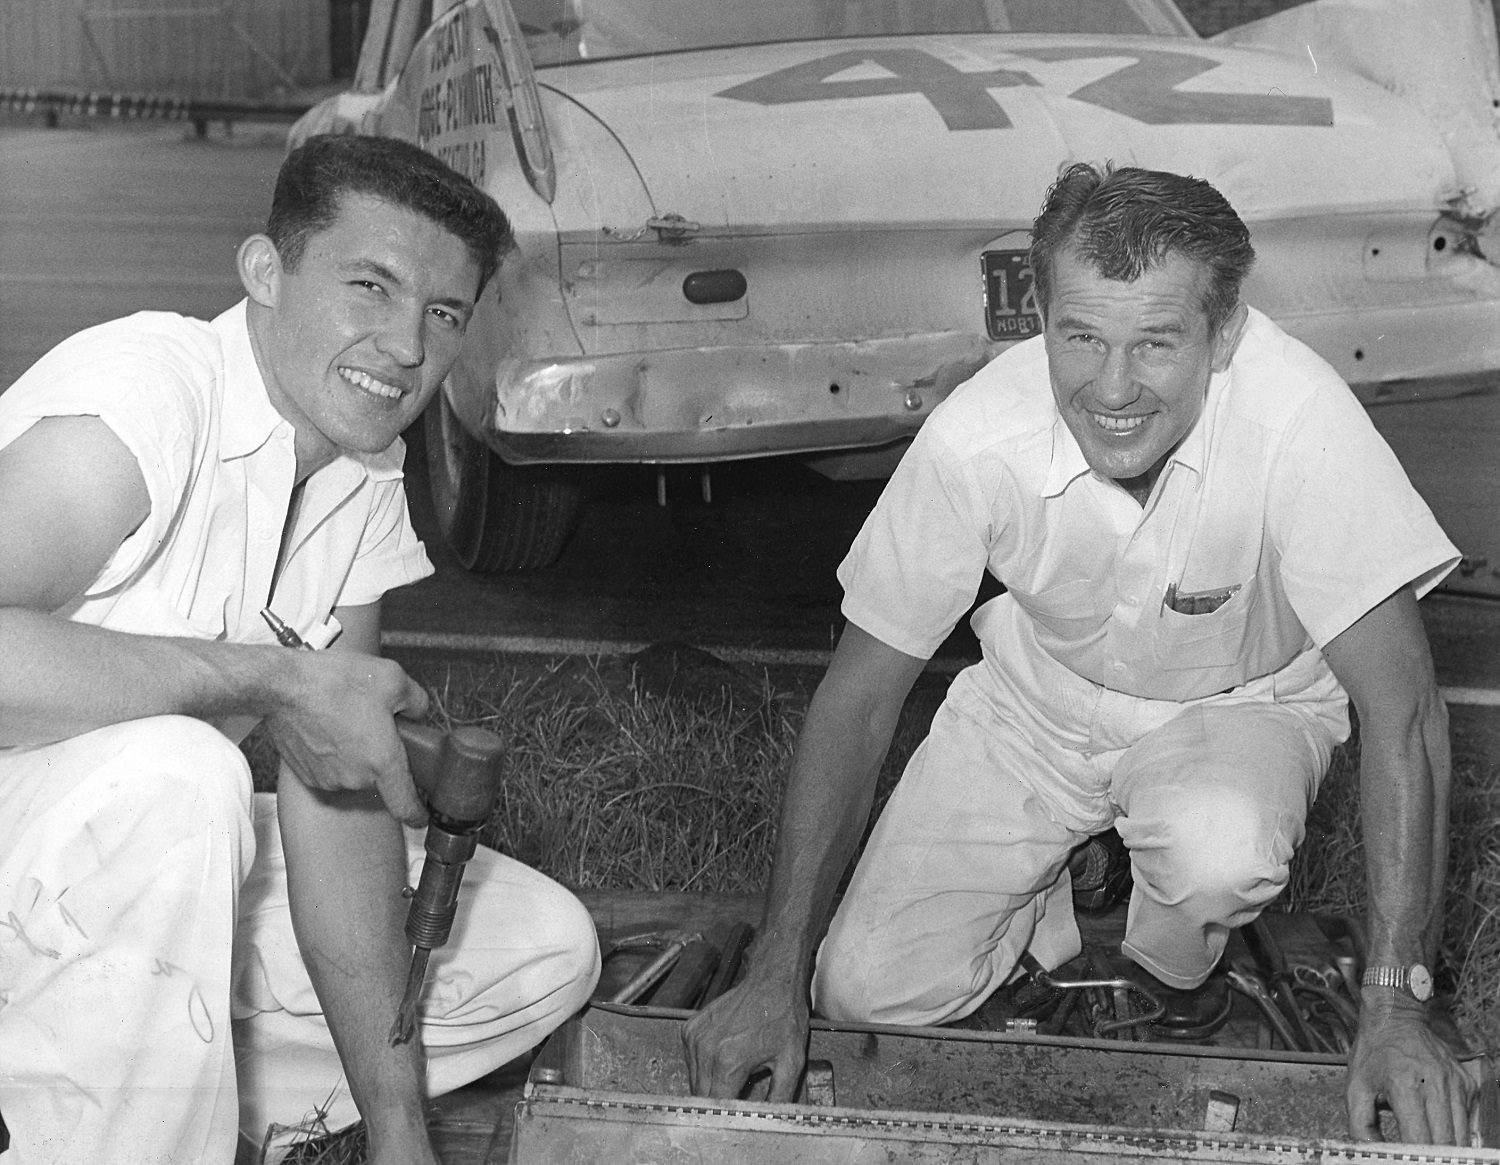 Richard Petty and his father, Lee Petty, take a break for a photo at a NASCAR Cup event in 1959.